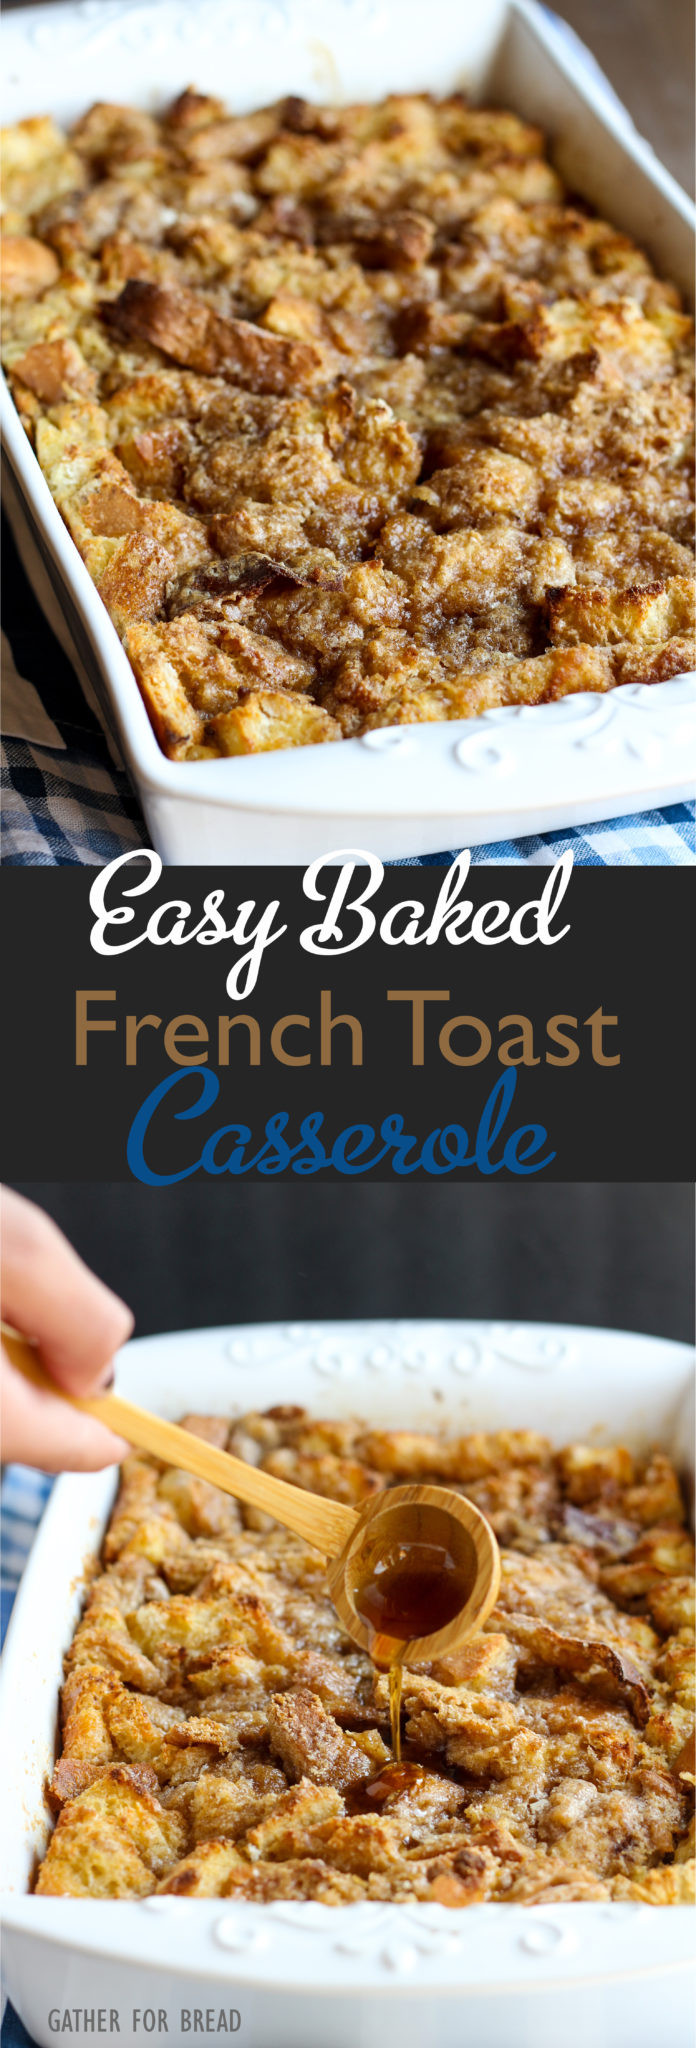 Easy French Toast Casserole
 Easy Baked French Toast Casserole